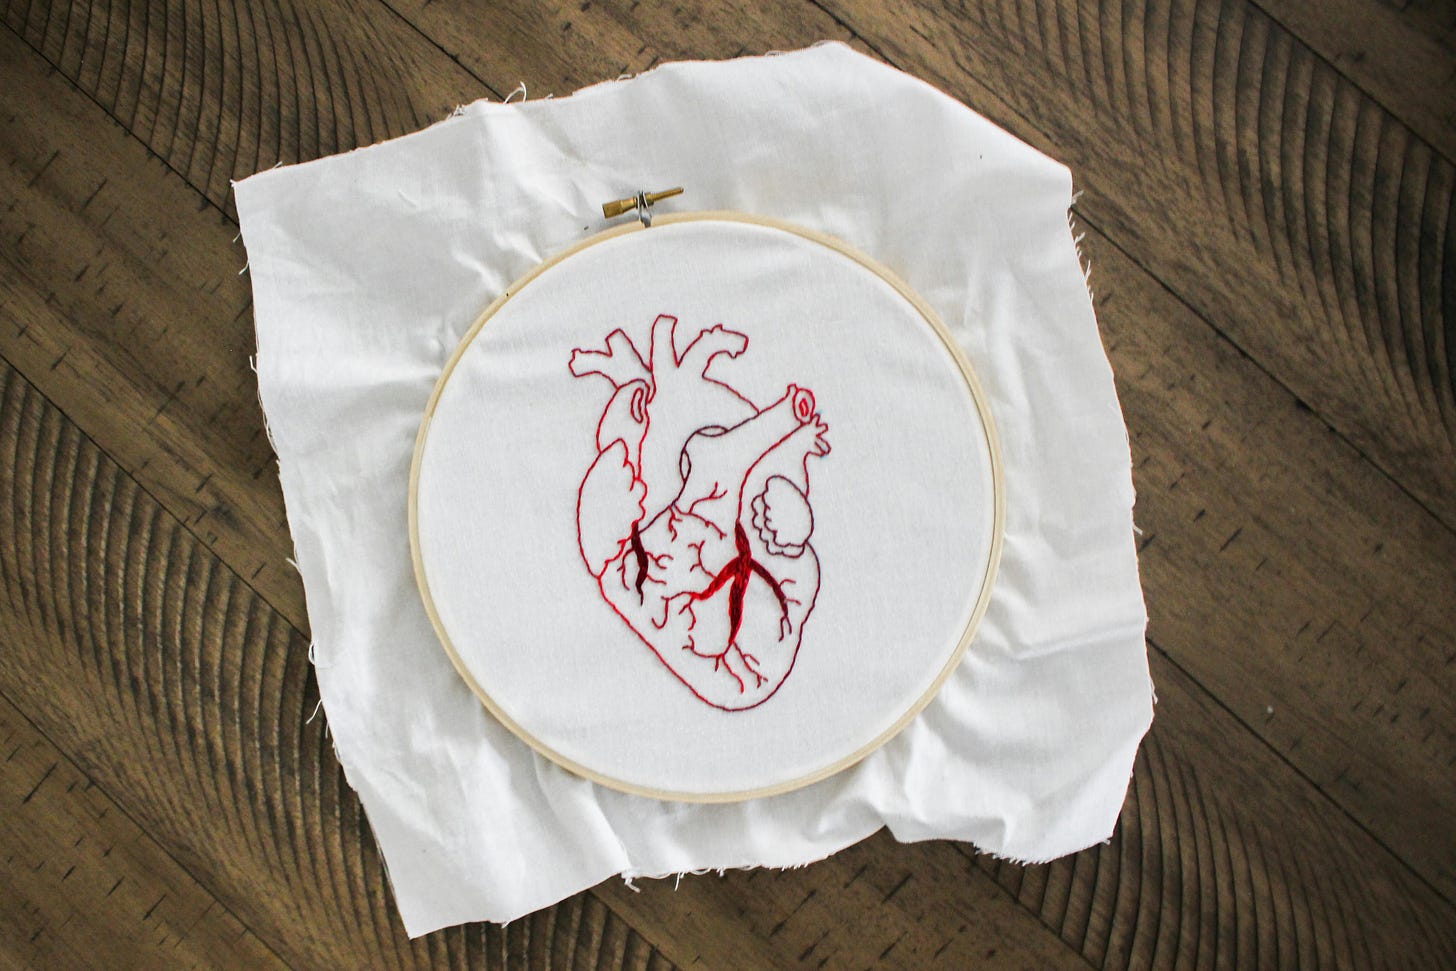 Photo by Magdaline Nicole after embroidery heart on white cloth 